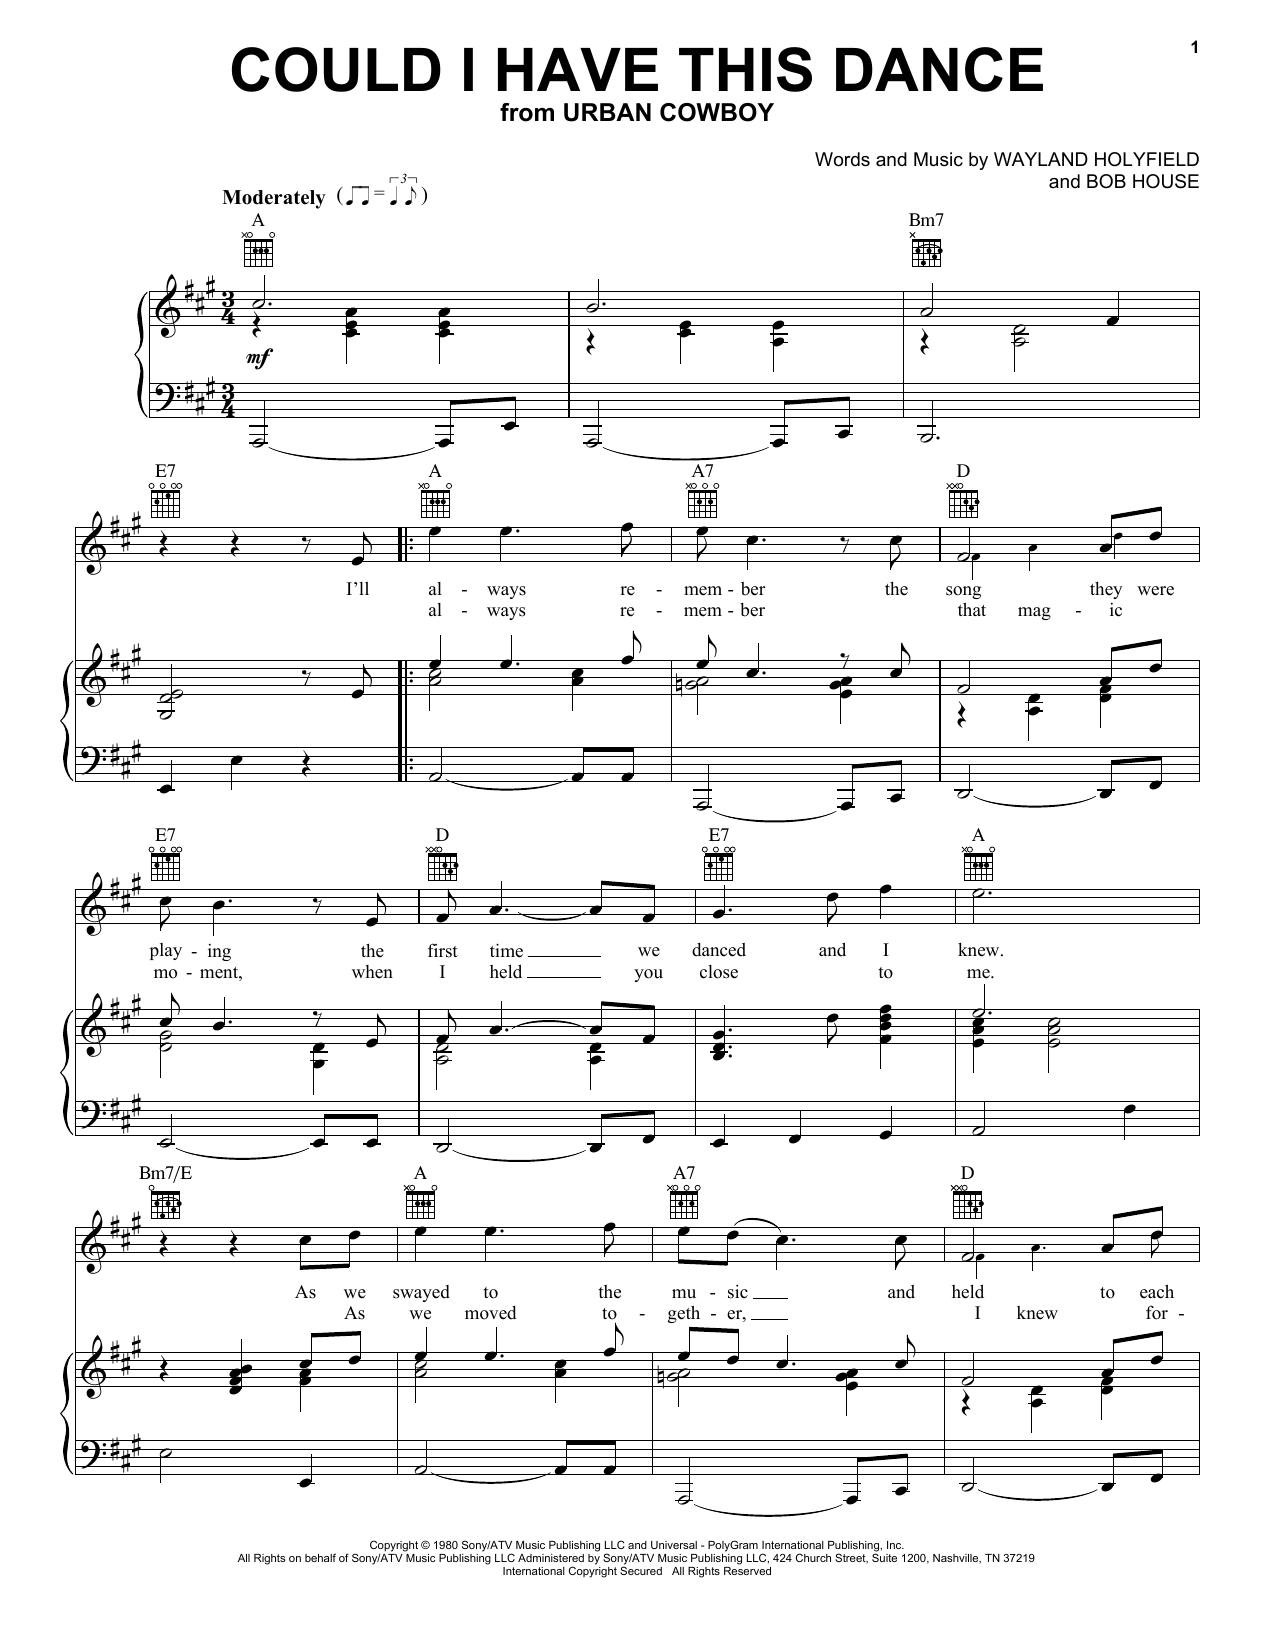 Anne Murray Could I Have This Dance sheet music notes and chords. Download Printable PDF.